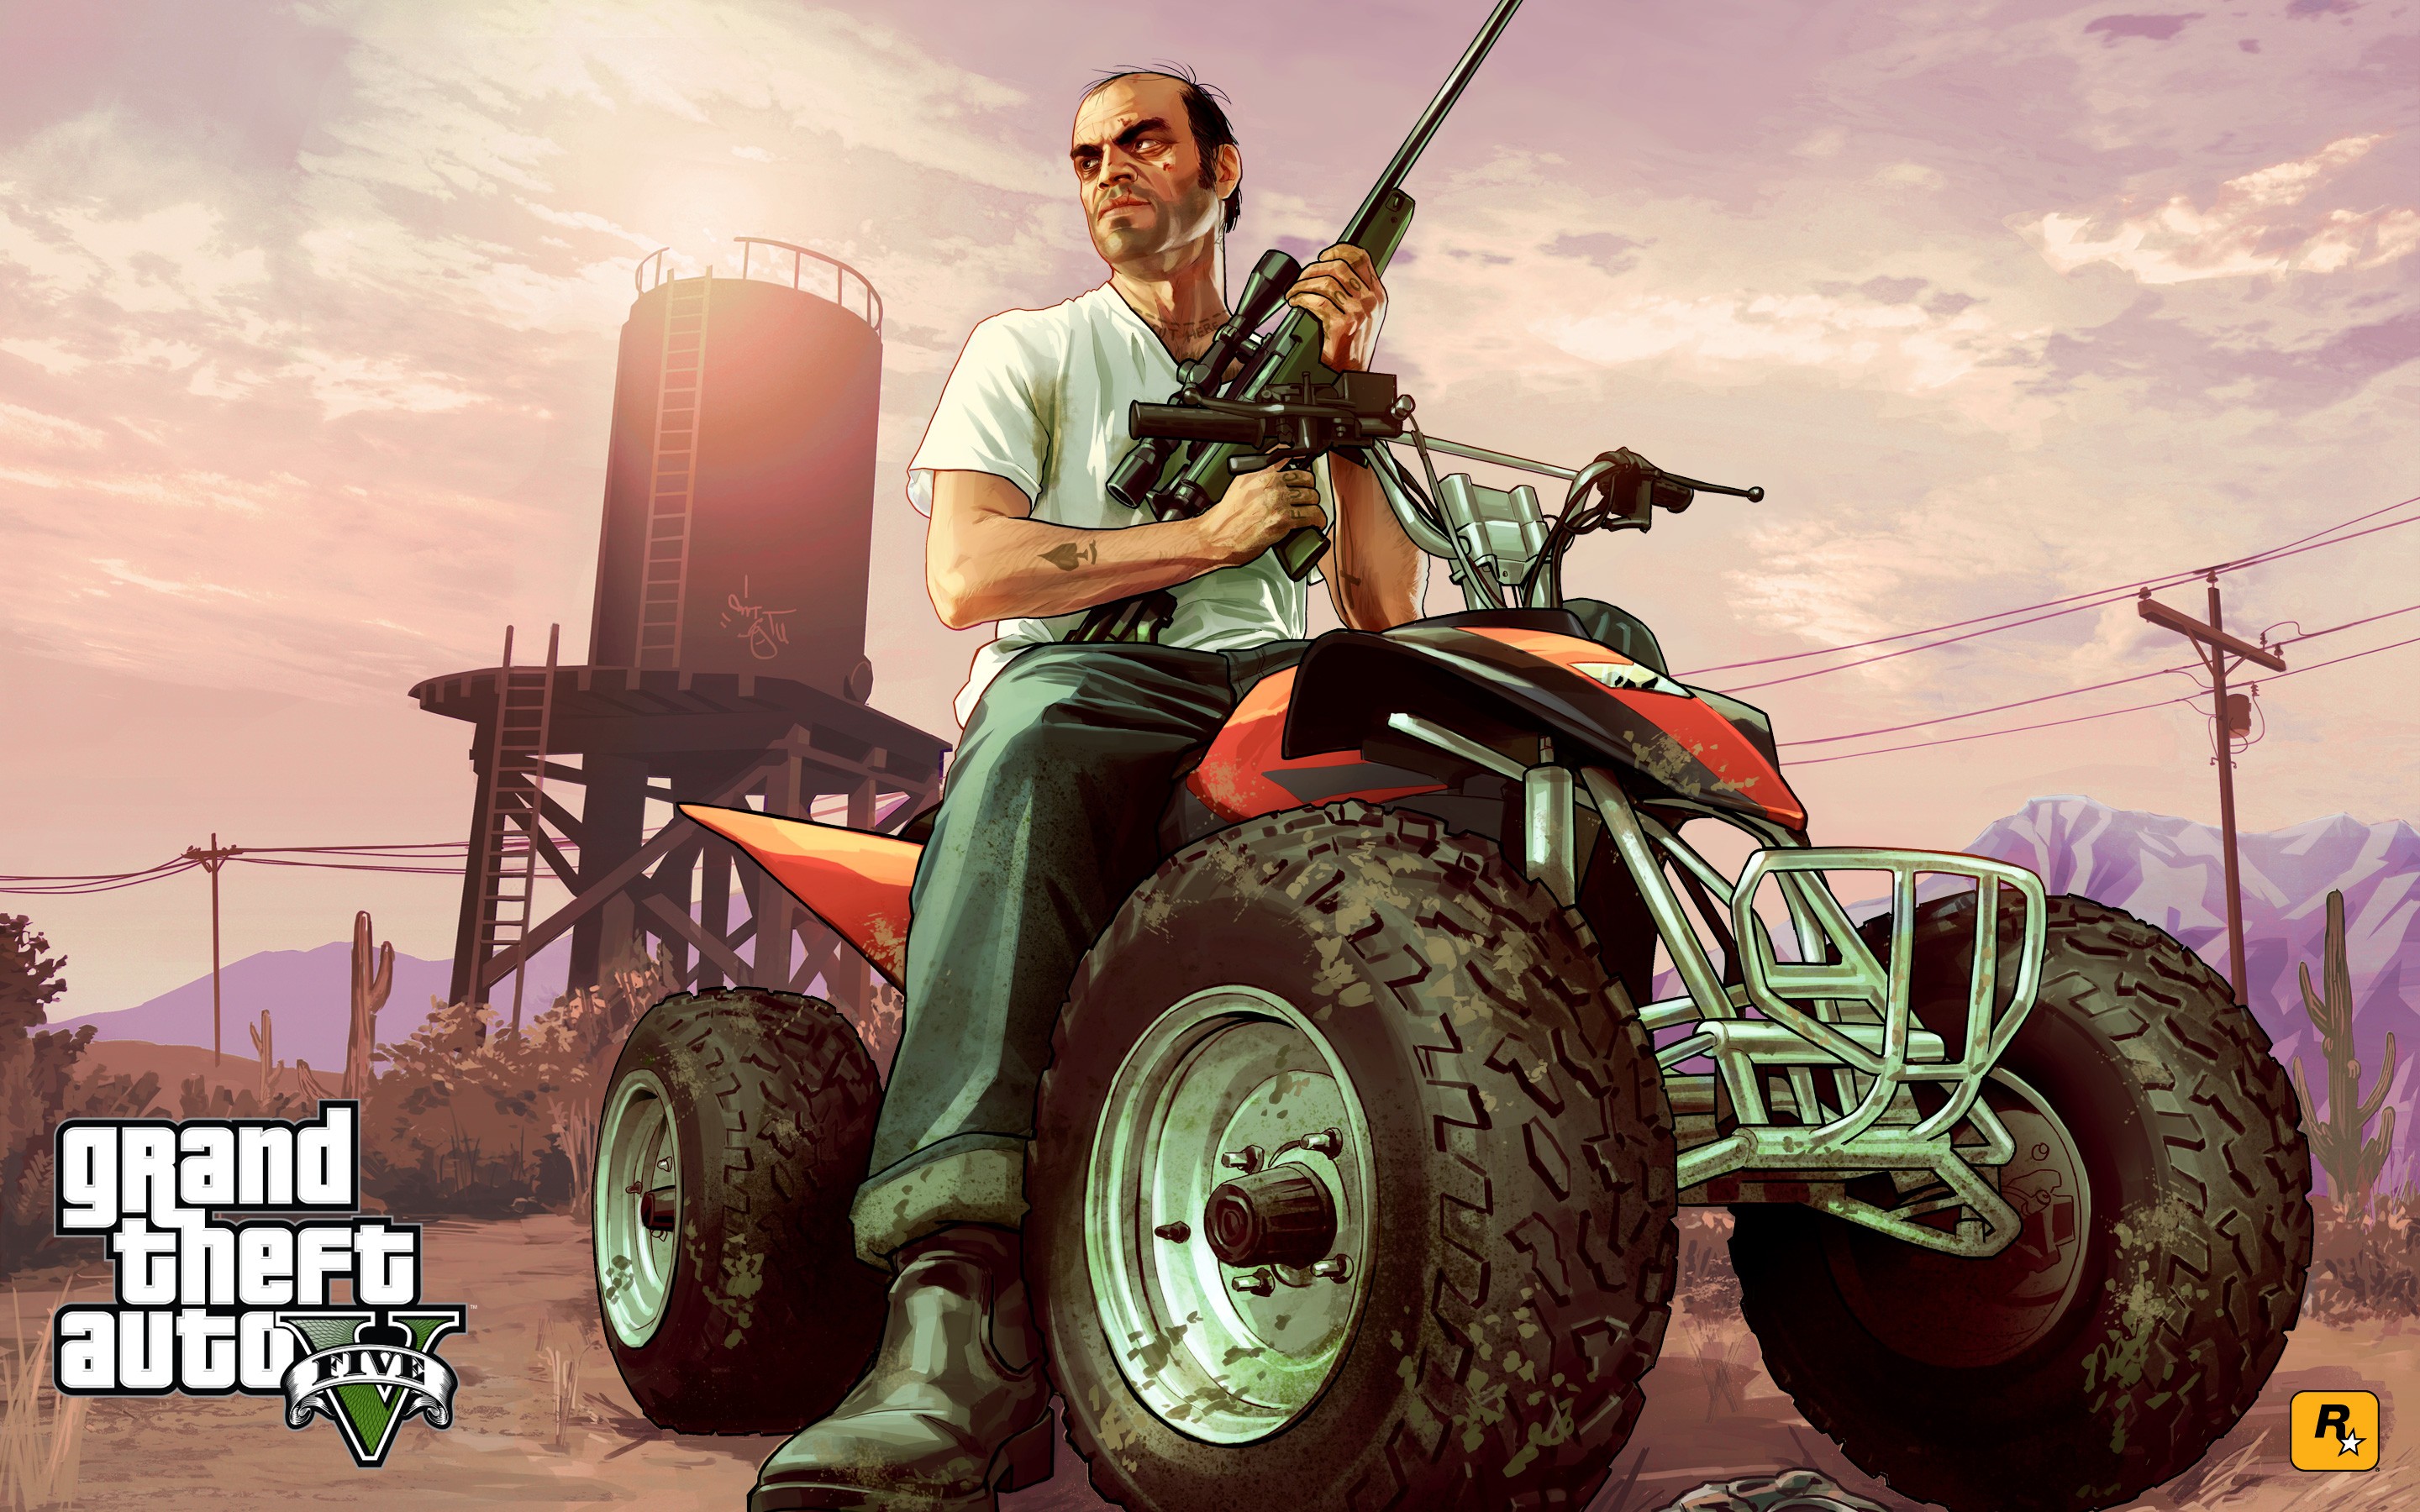 General 2880x1800 Grand Theft Auto V Grand Theft Auto video games video game characters Rockstar Games Trevor Philips sniper rifle ATVs